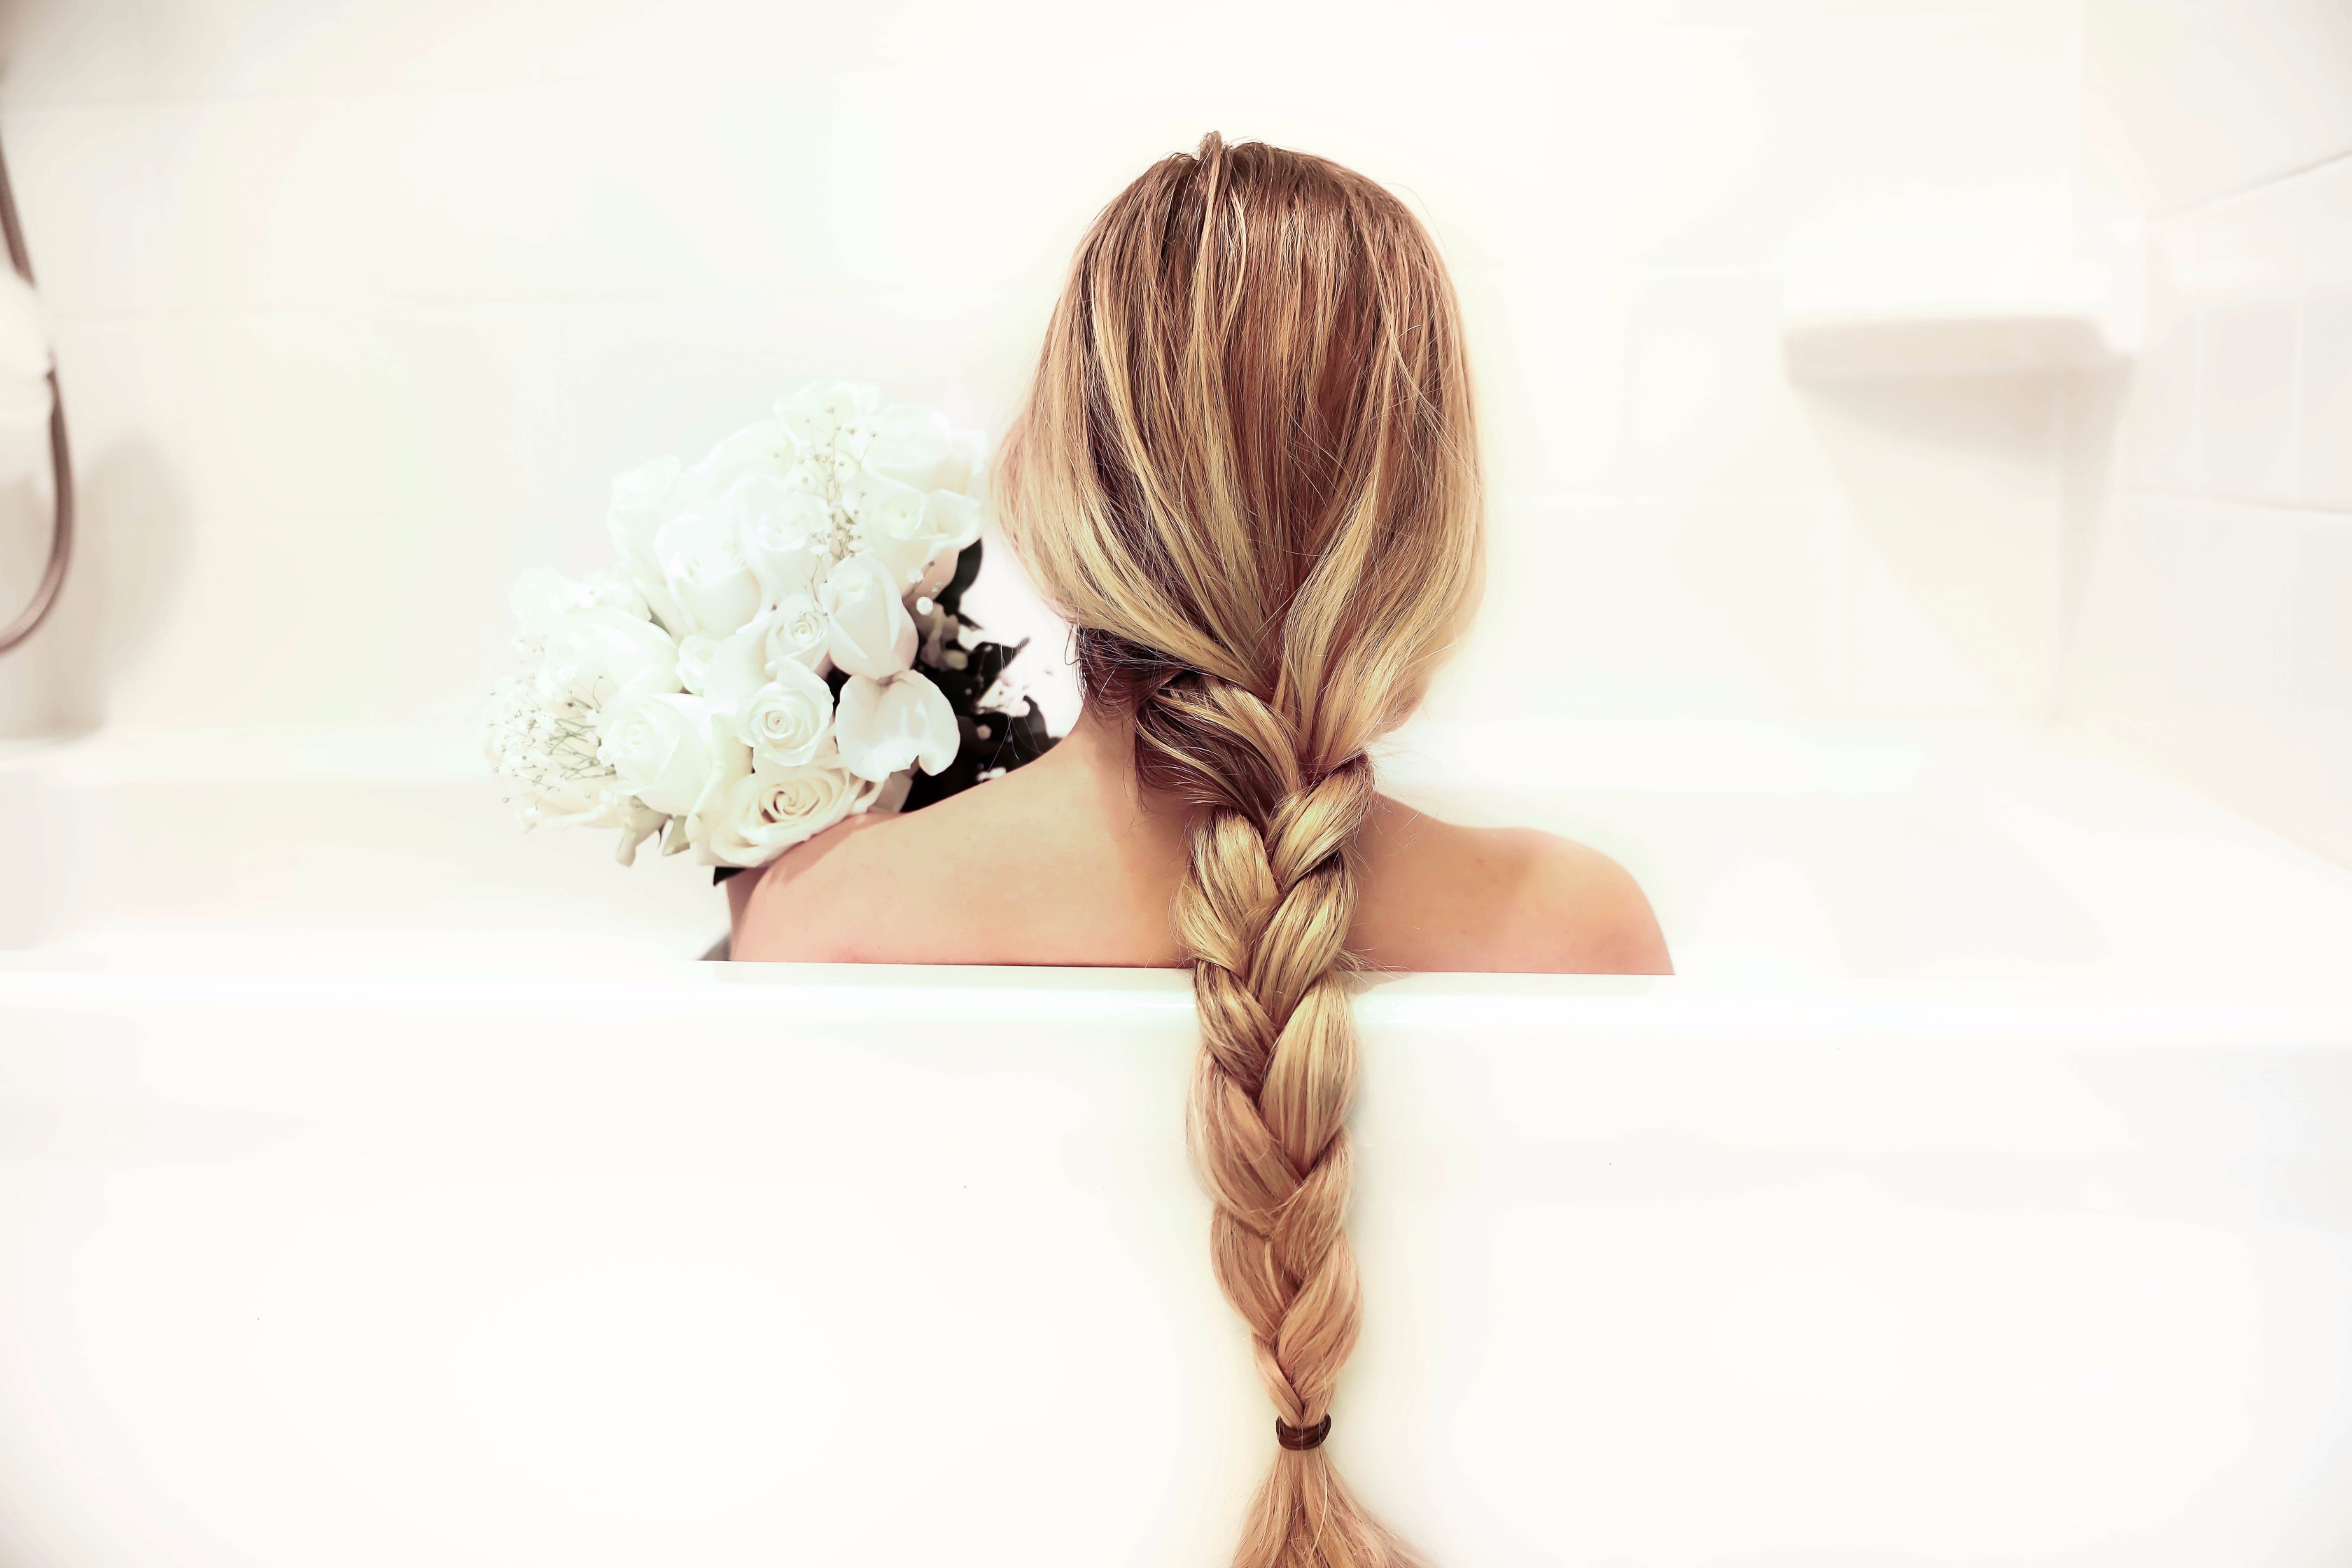 Relaxation and unwind tips bathtub flowers braid daily dose of charm lauren 4P6A9115-2 2